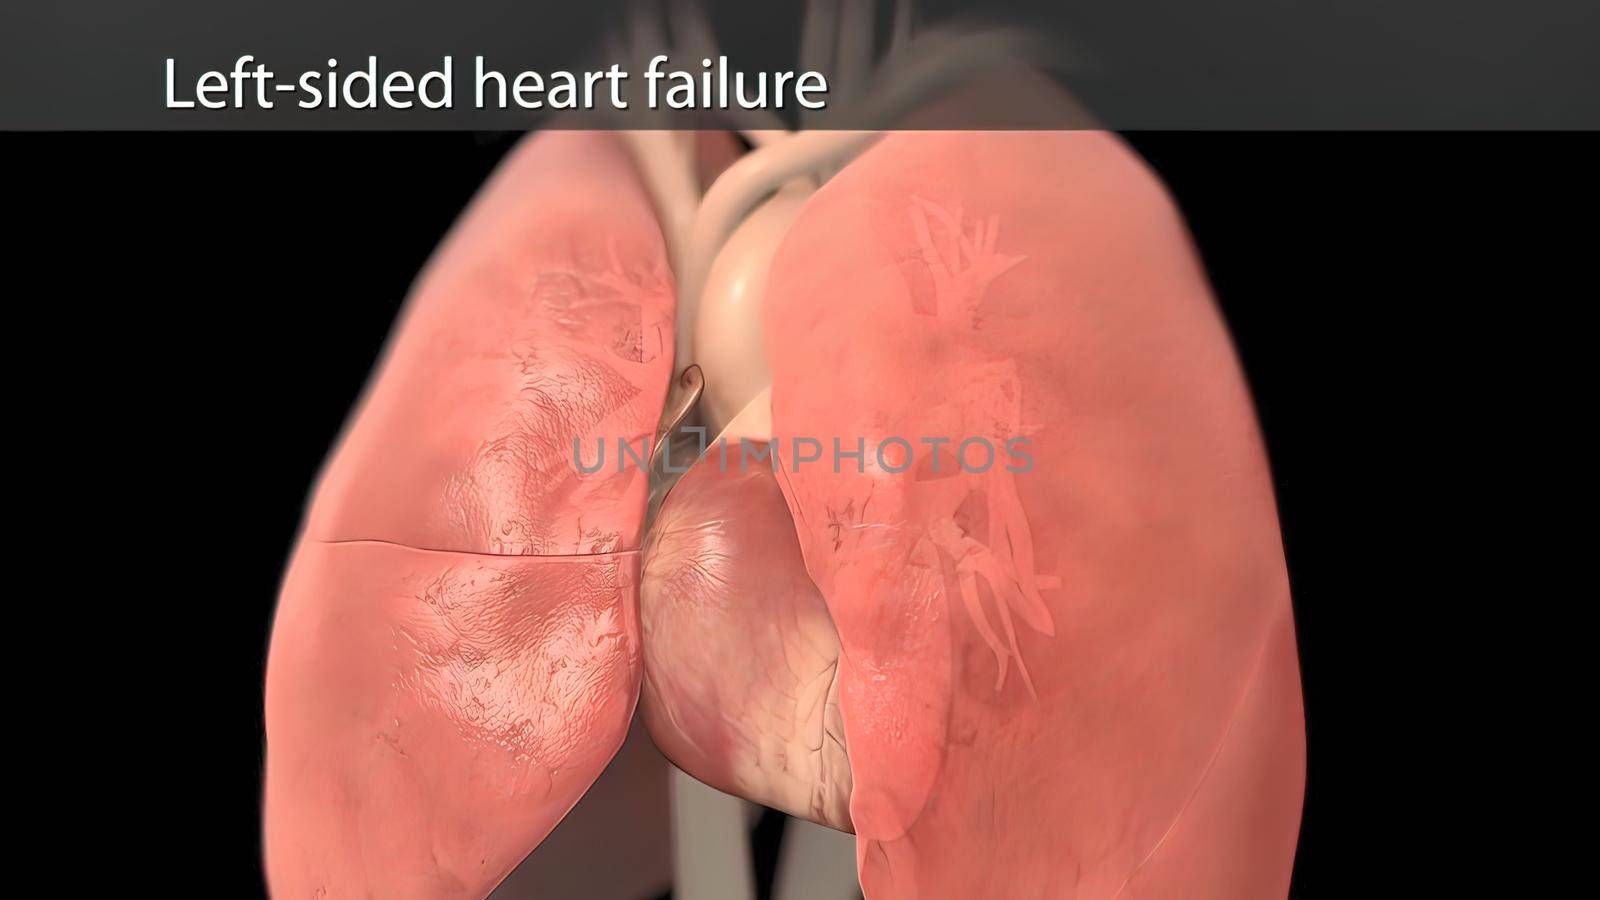 Left atrium, one of the four chambers of the heart. The left atrium receives blood full of oxygen from the lungs and then empties the blood into the left ventricle 3D illustration